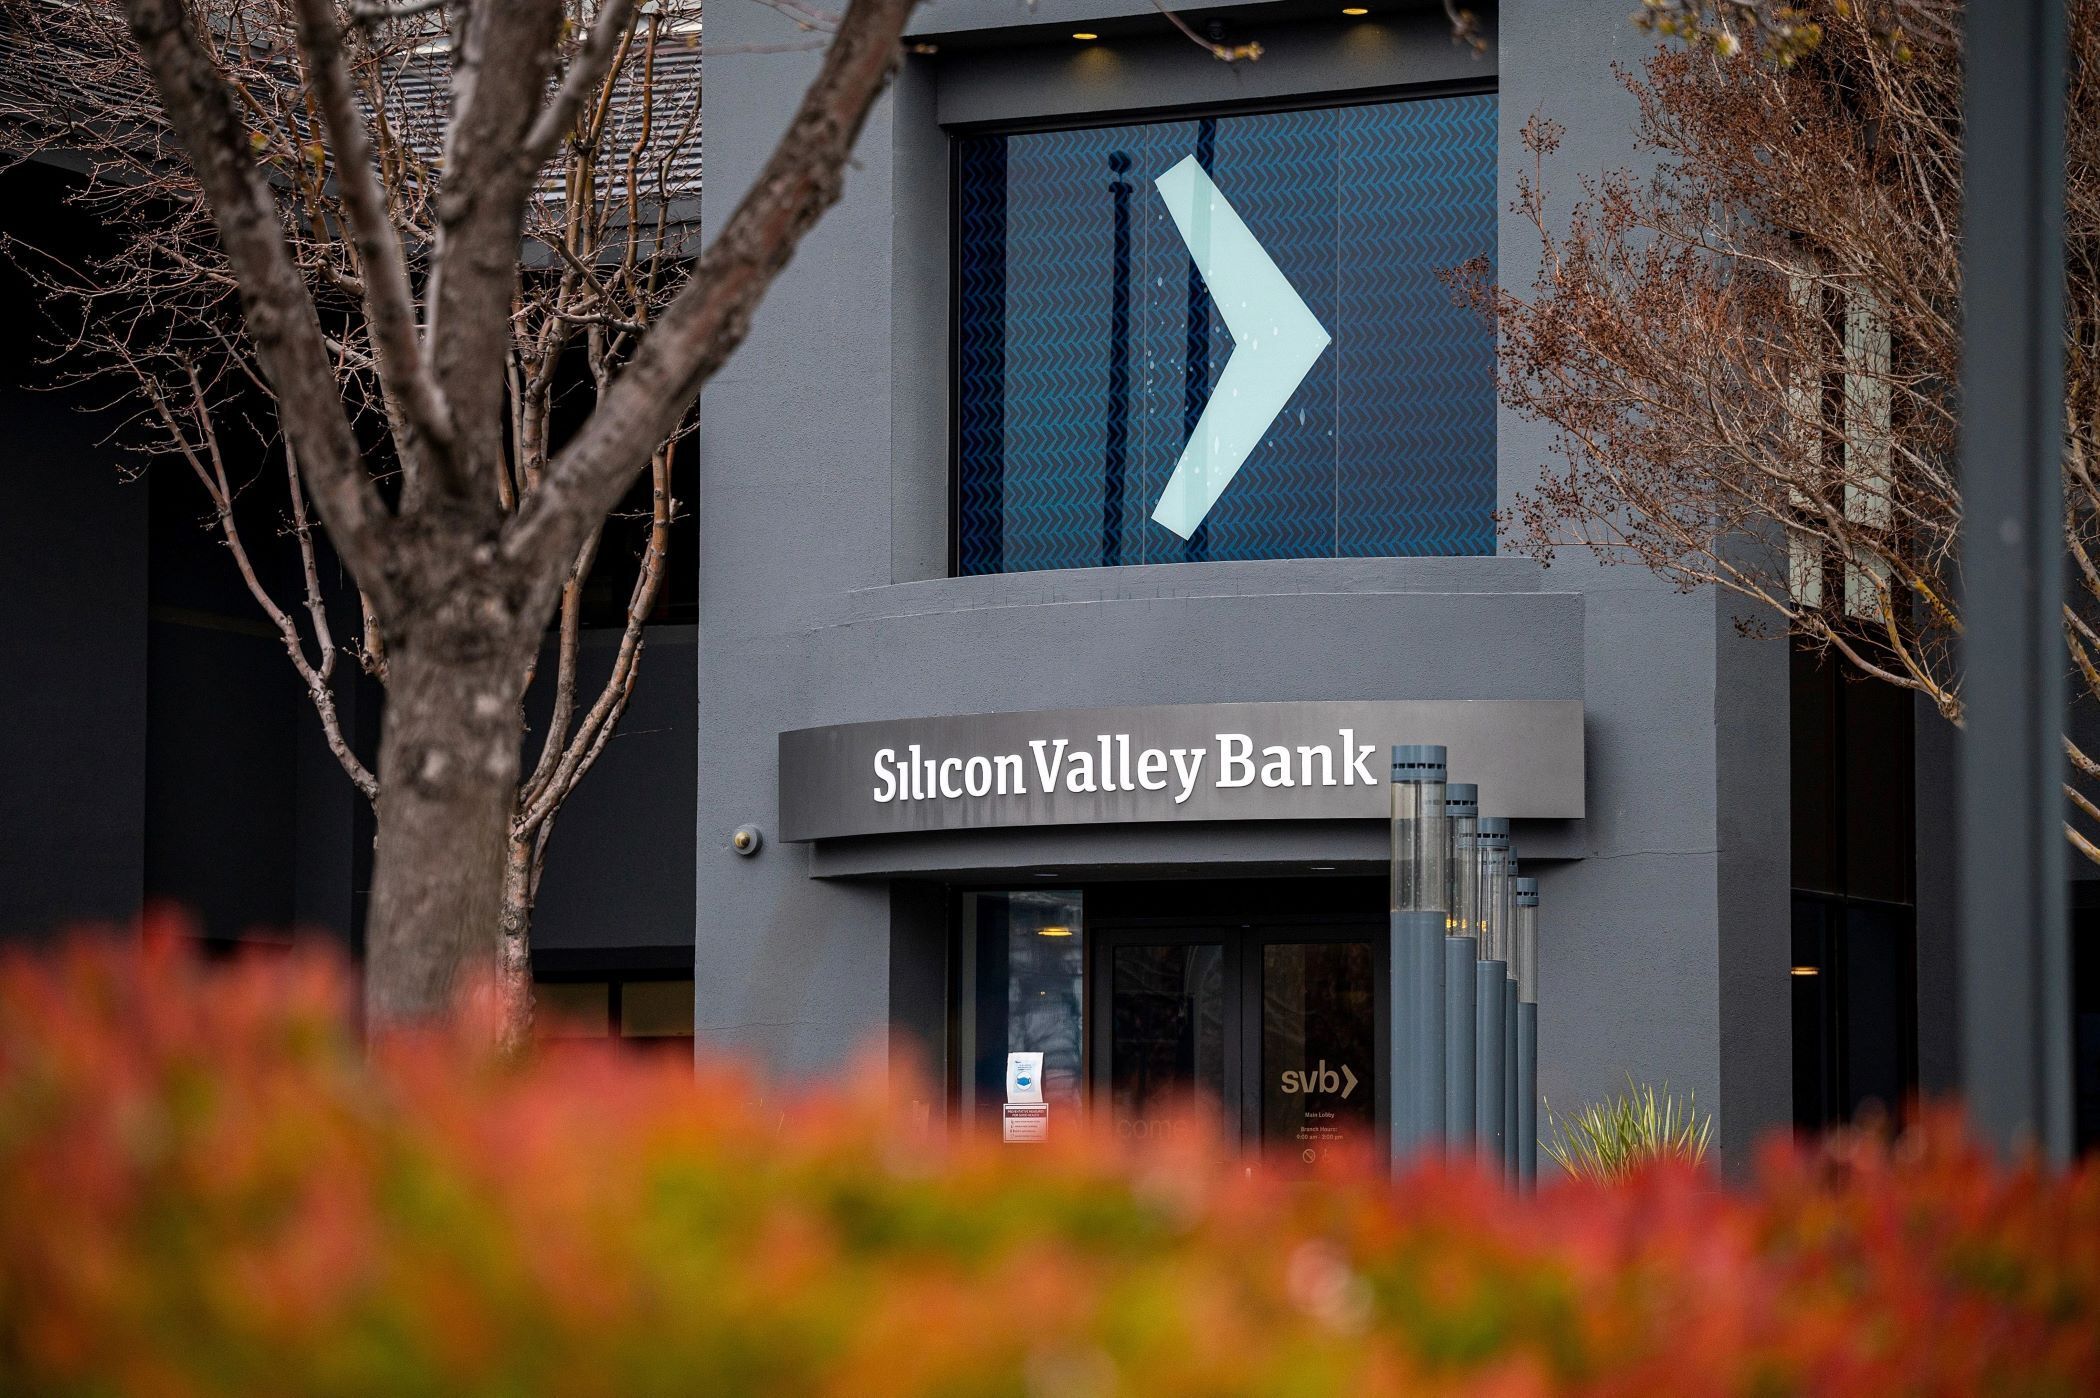 The decline in venture capital investment is linked to the recent collapse of Silicon Valley Bank, a stalwart of the startup ecosystem. (Getty Images)